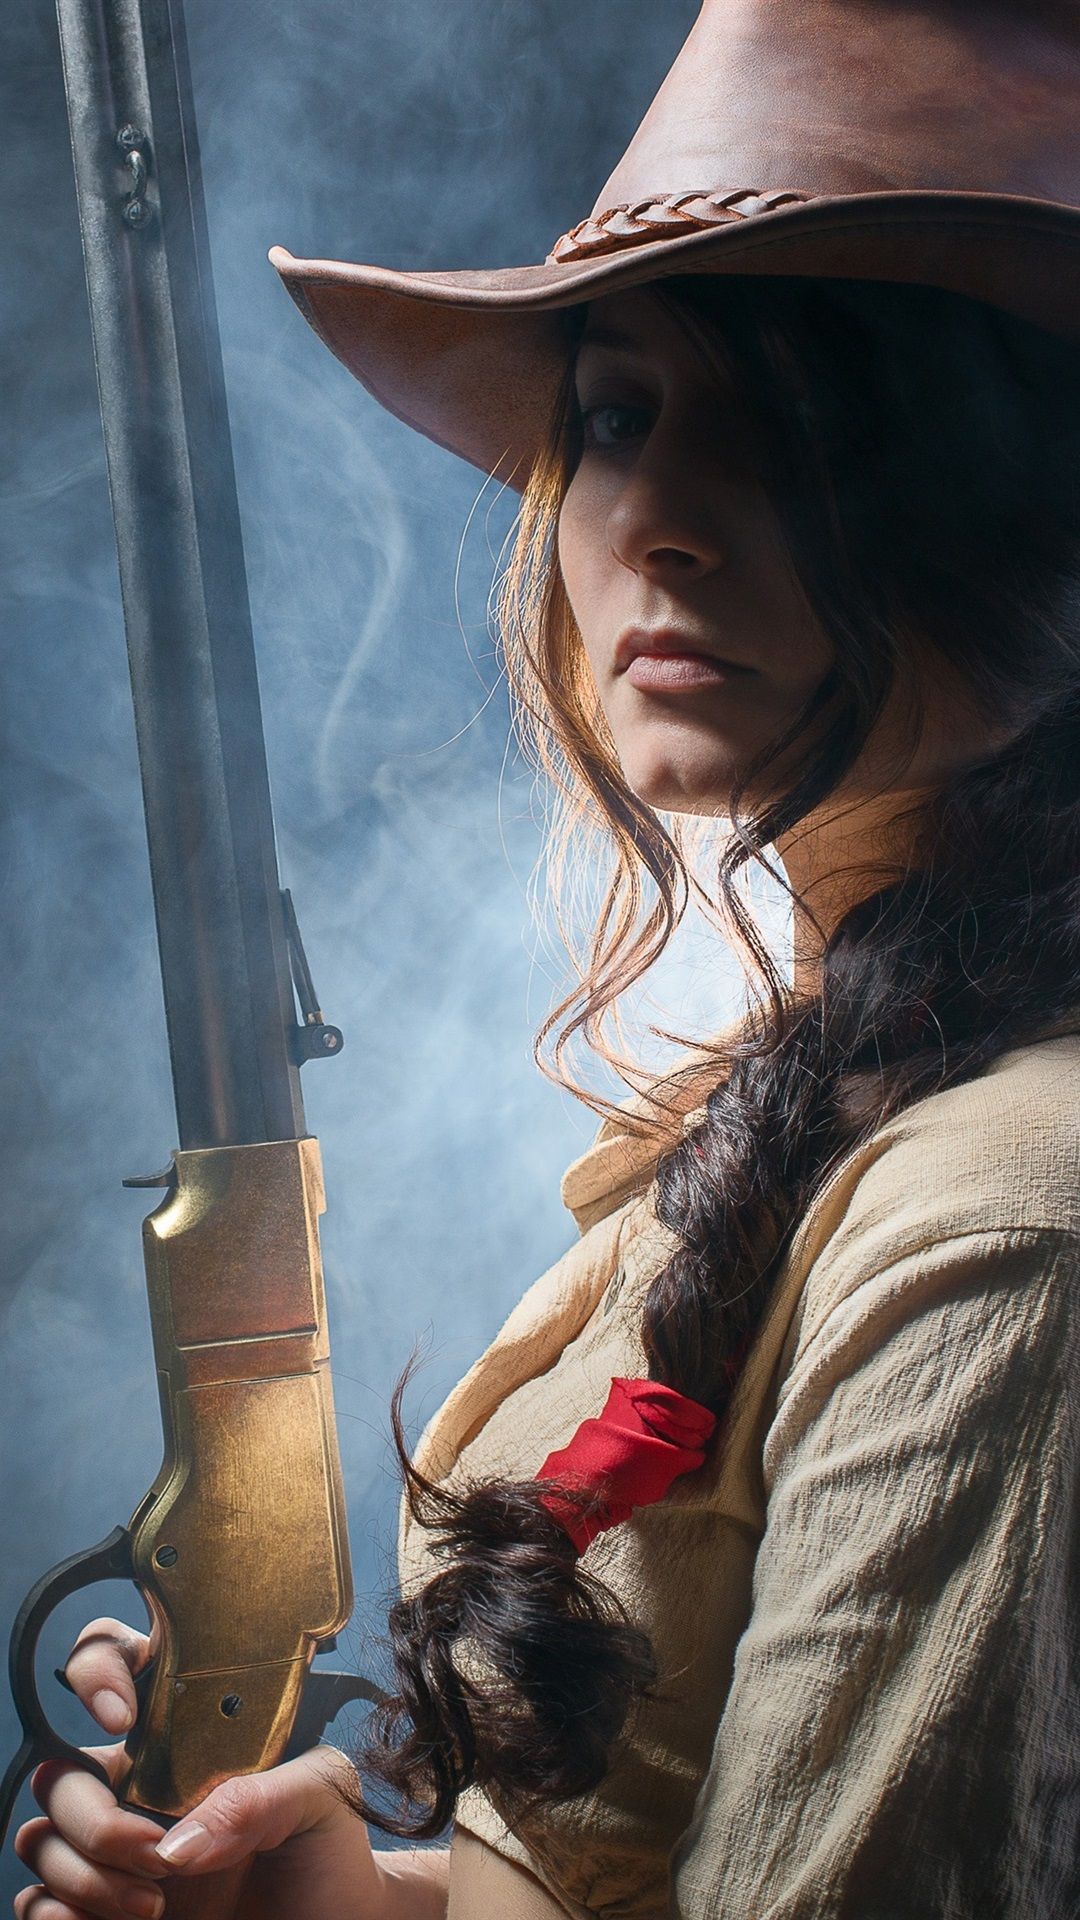 1080x1920 Wallpaper Wild West Girl Rifle In Hands Cowboy Hat 3840x2160 Uhd 4k Picture Image